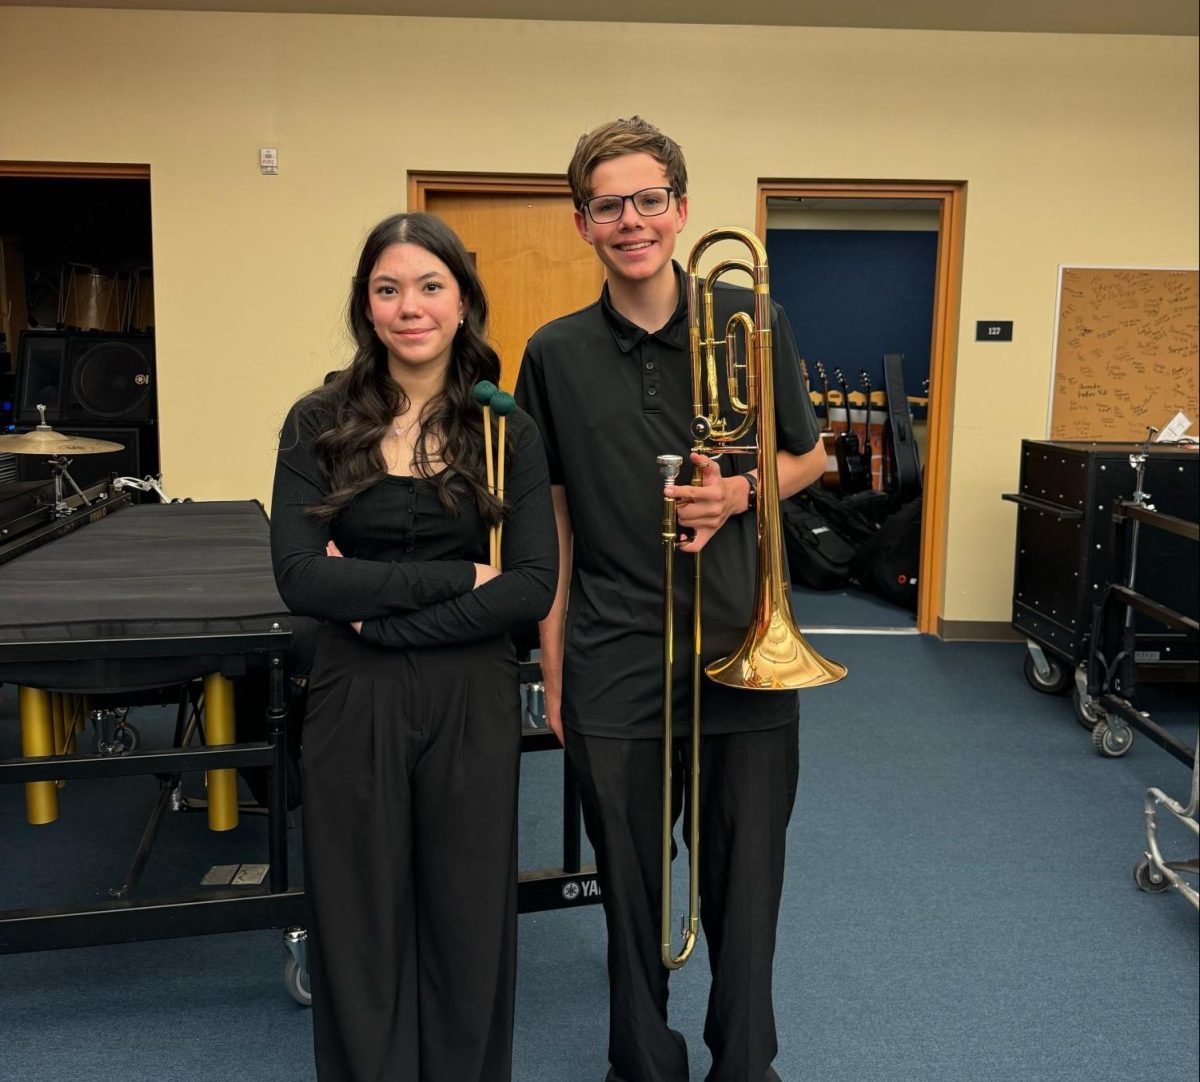 Adrienne Landerville ‘27 and Connor Reyburn ‘24. They both received Superior ratings on their solos at the Nevada Music Educators Association Solo and Ensemble held at Del Sol High School on February 10. Superior is the highest rating a performer can receive at this event. 
